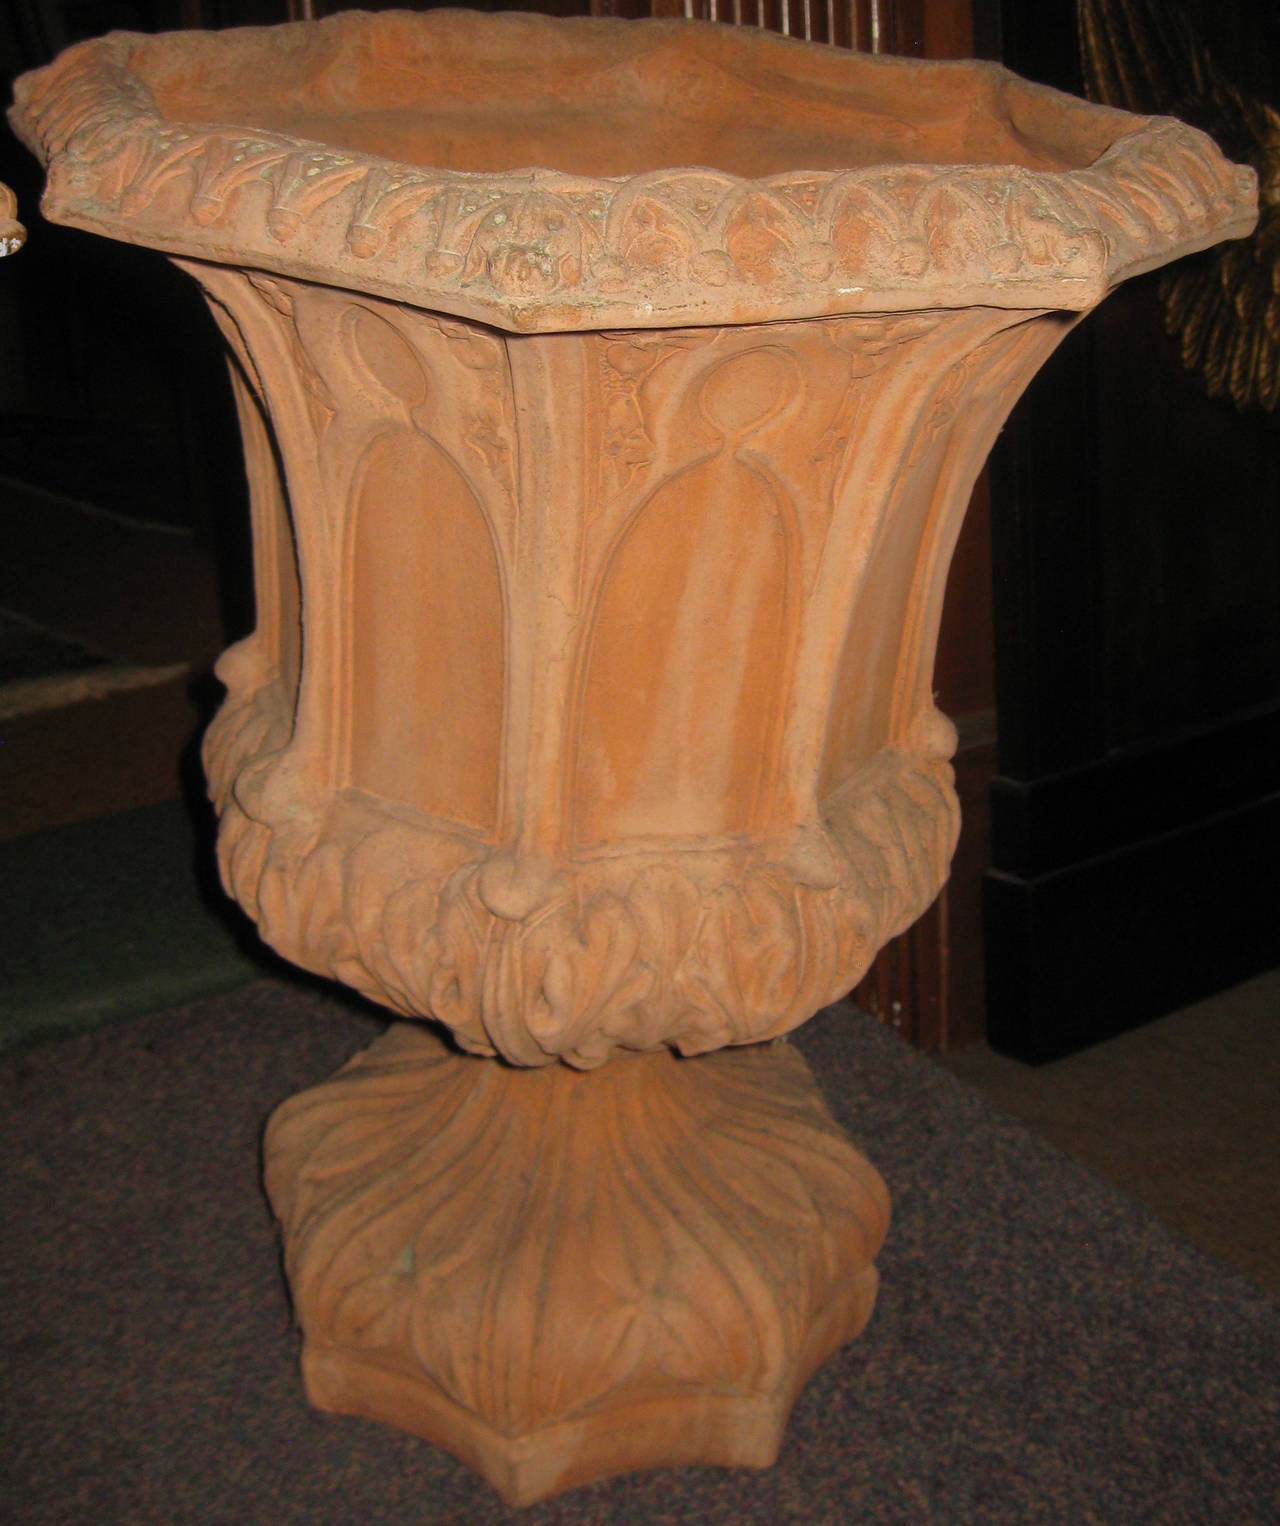 Designer pair of Italian octagonal shaped heavy terracotta, mid 20th c. pedestal garden urns. Features include a raised extreme Gothic design with lots of detail. They are a nice size, fitting an 8